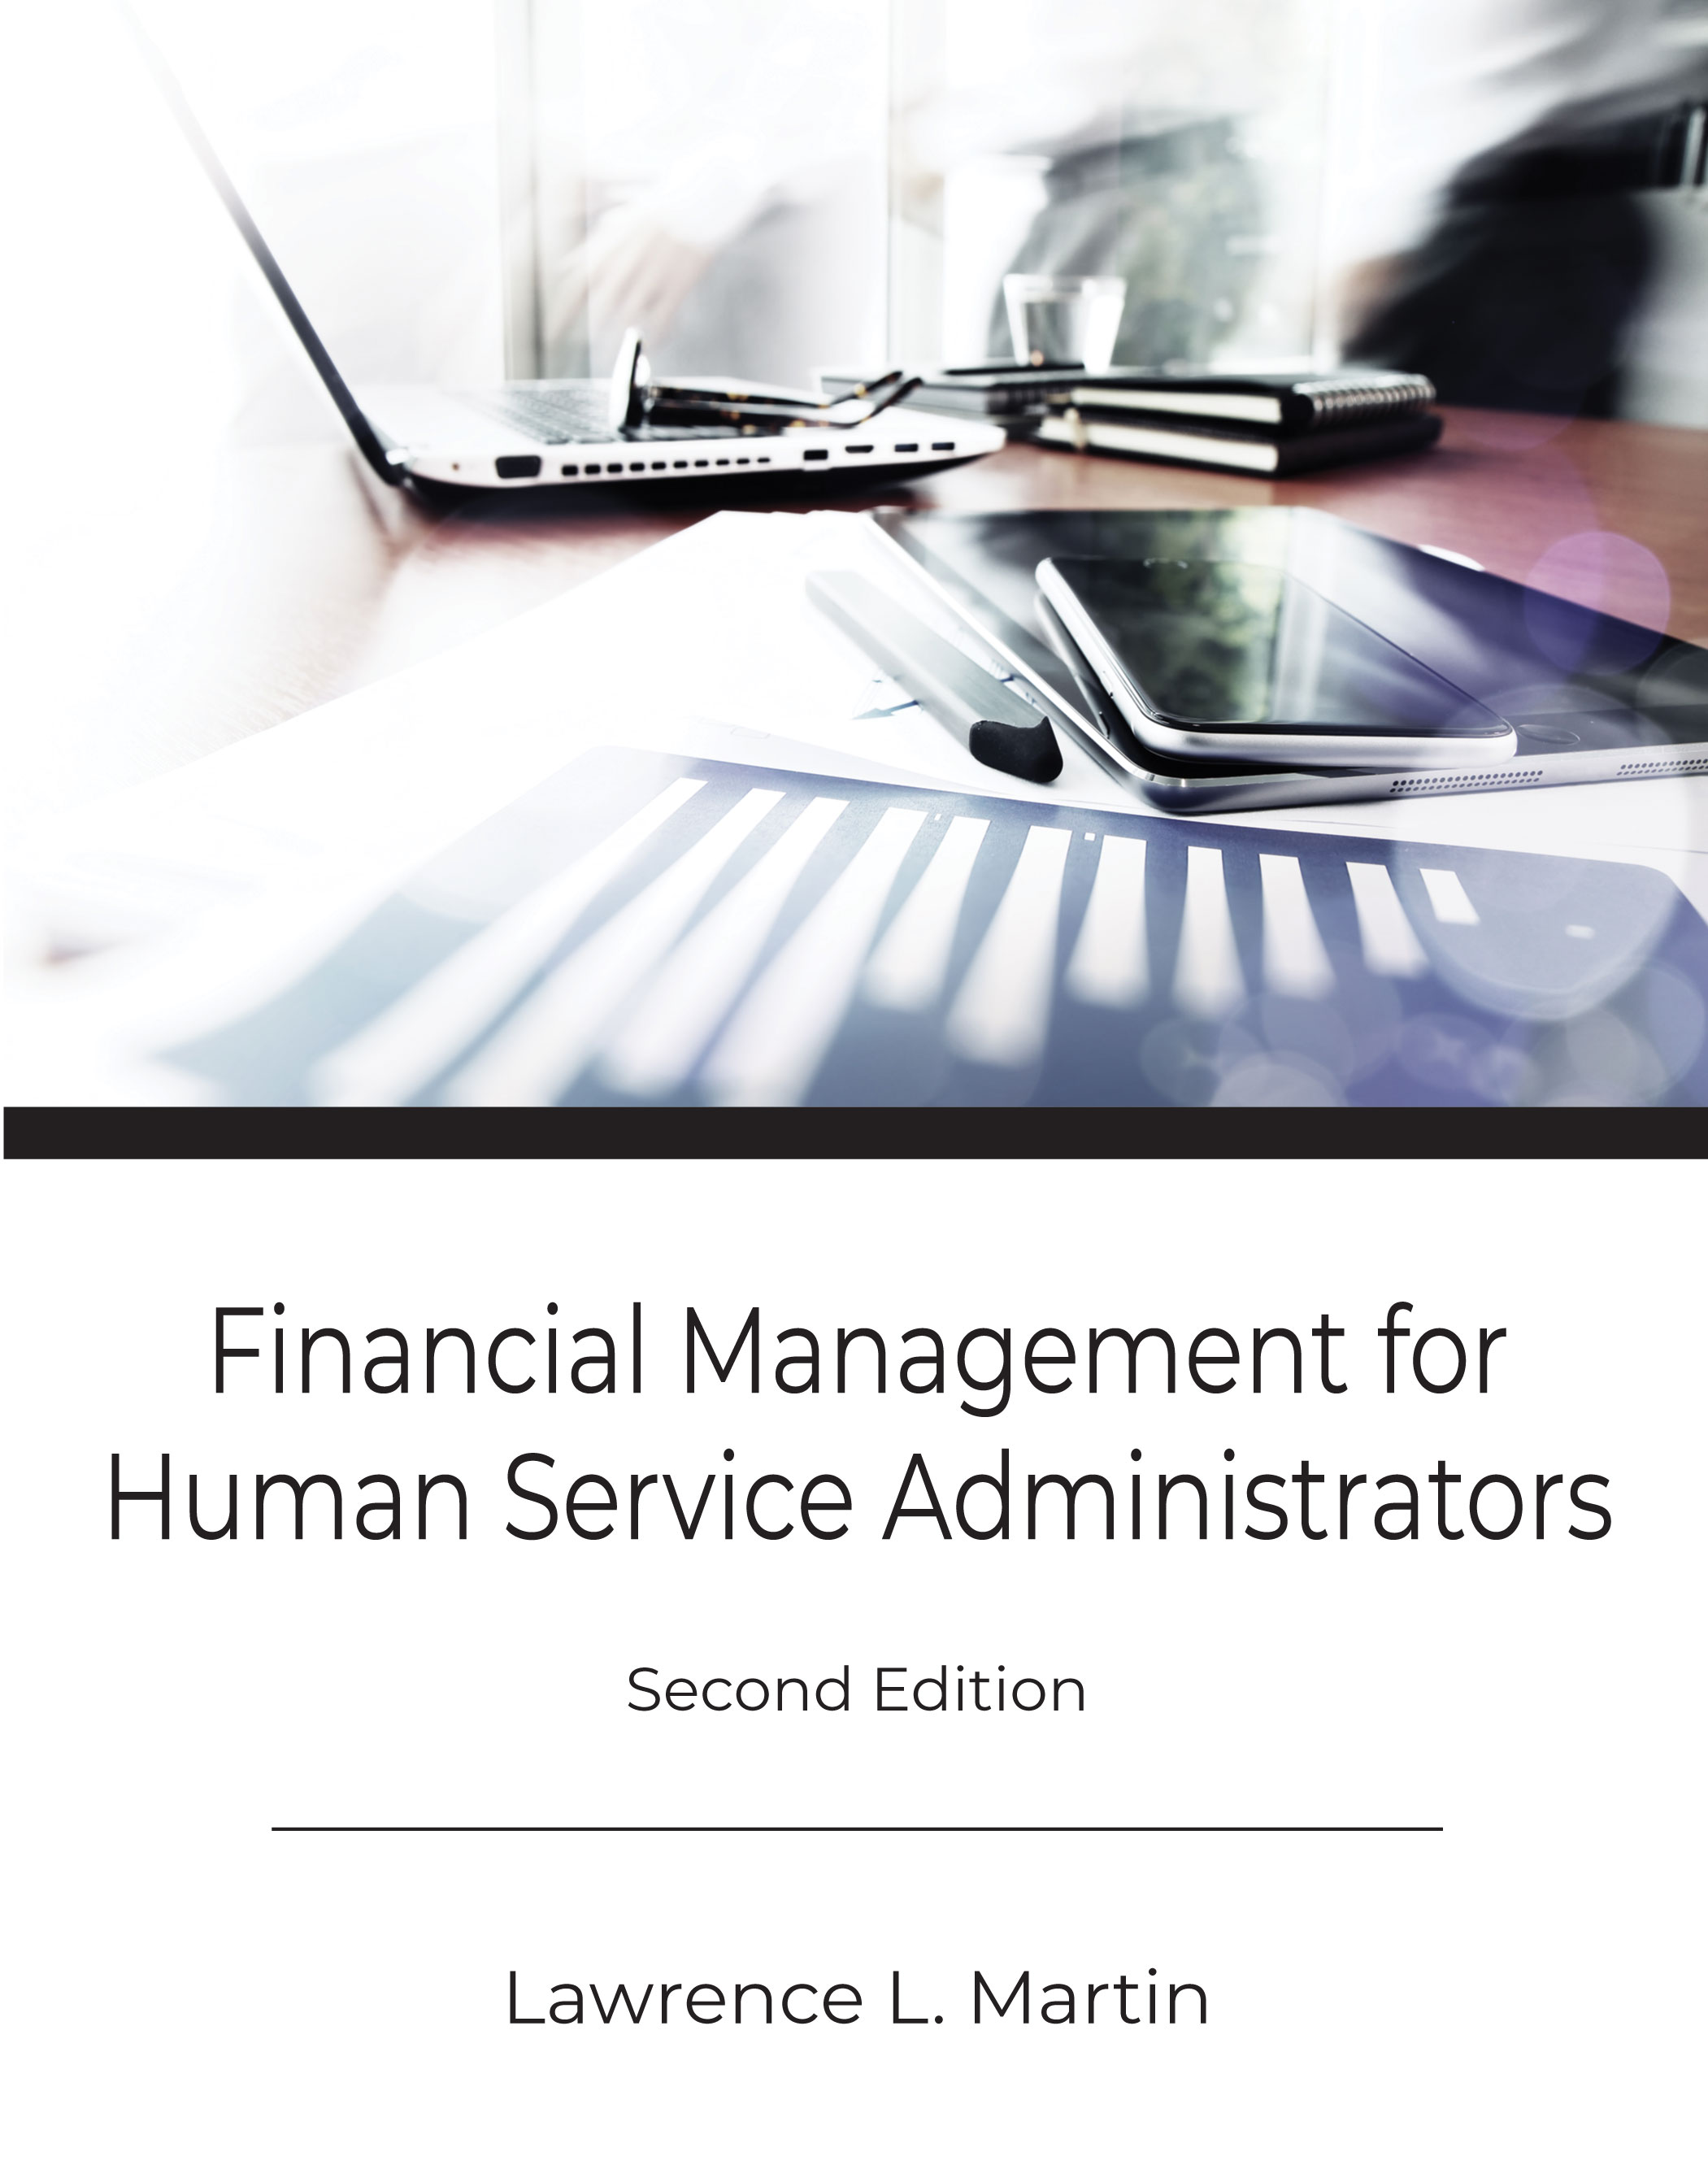 Financial Management for Human Service Administrators:  by Lawrence L. Martin